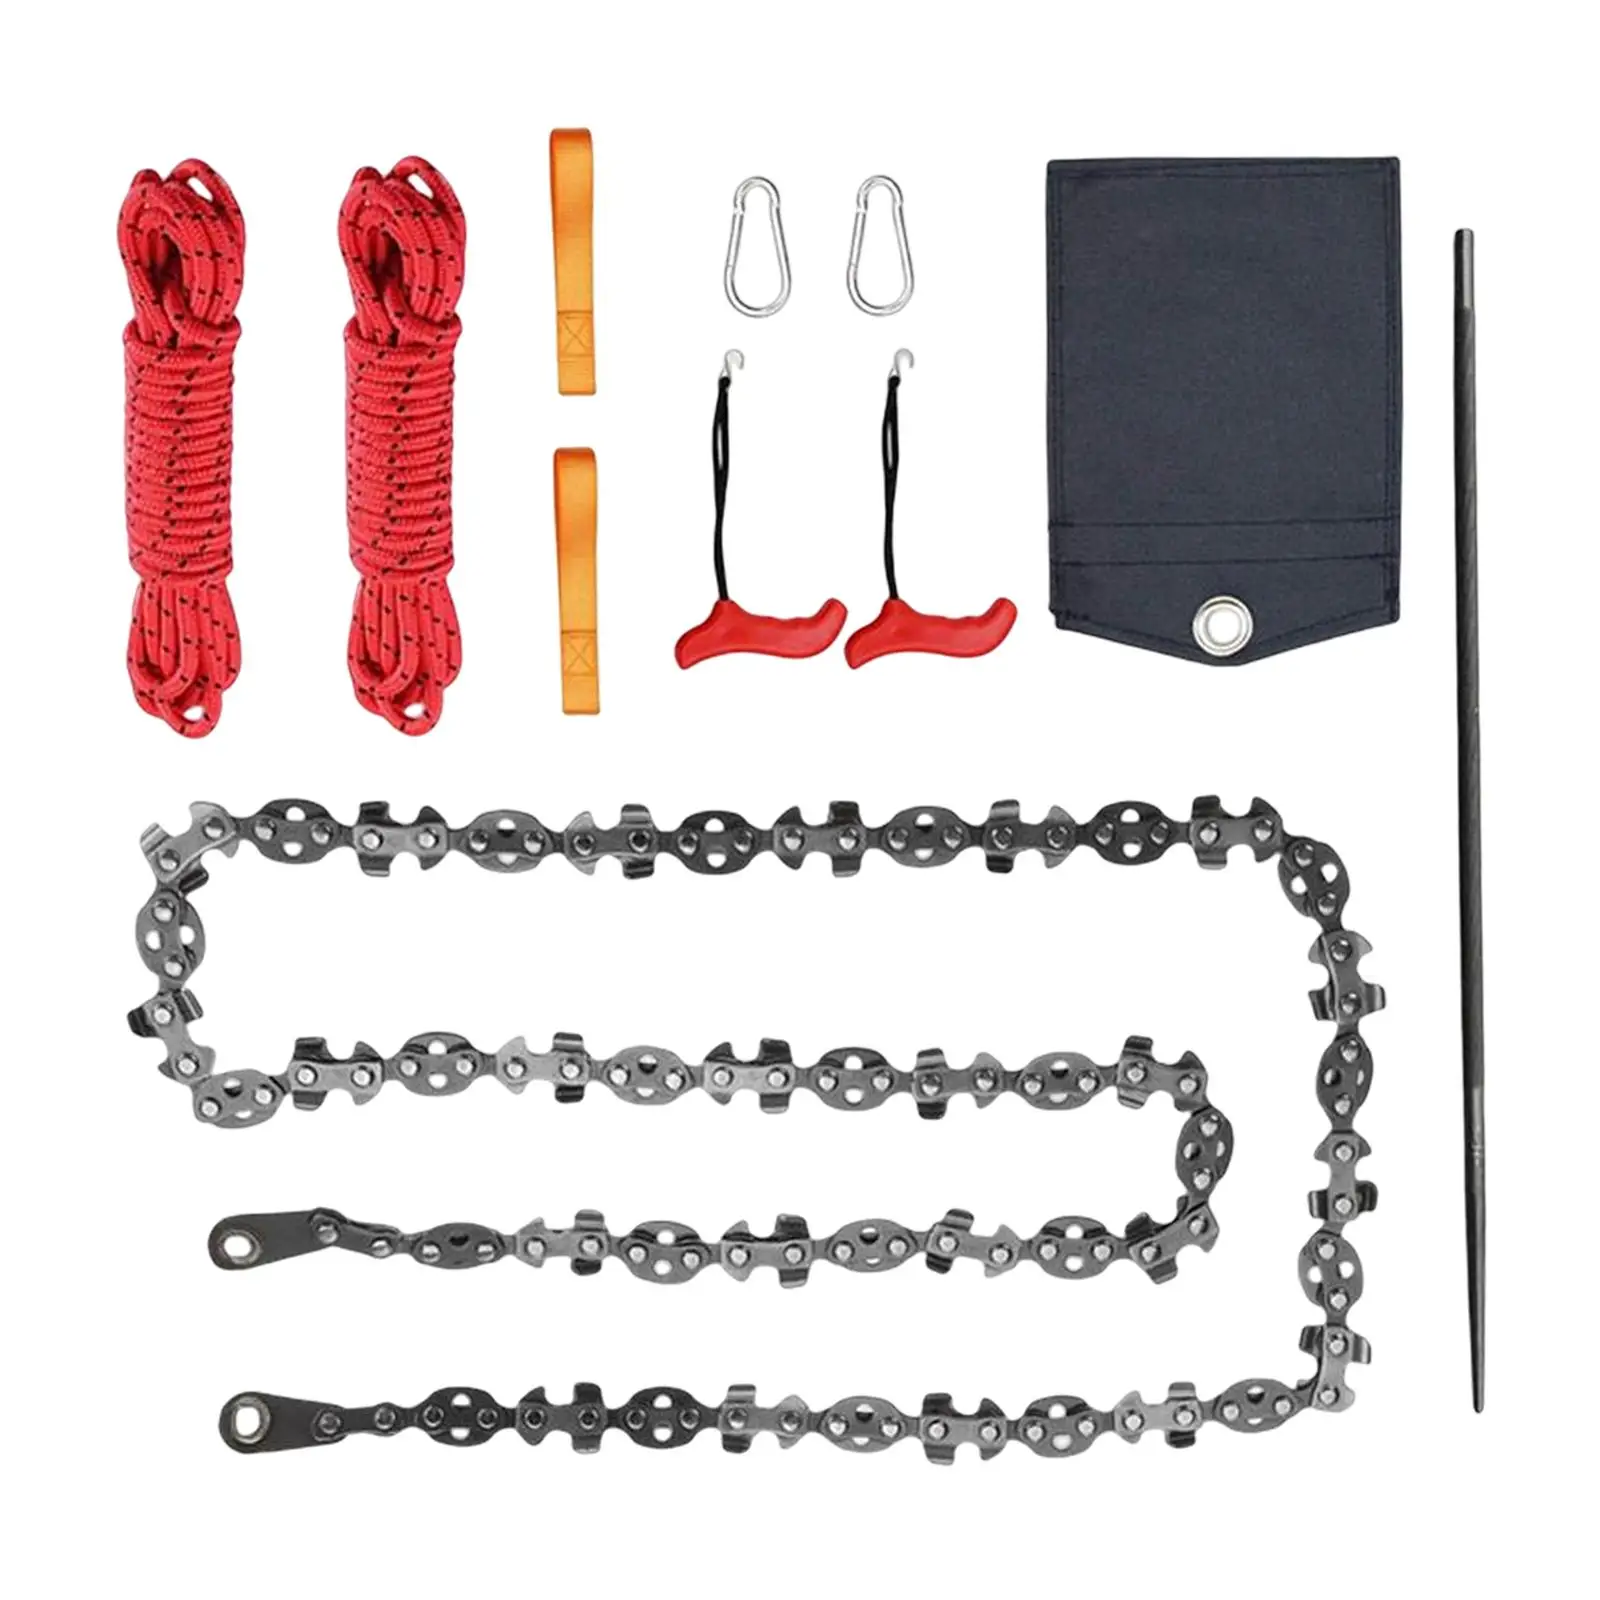 Lightweight Wire Saw Emergency Saw Zipper Saw Hand Chain Saw for Emergency Wood Cutting Gardening Camping Outdoor